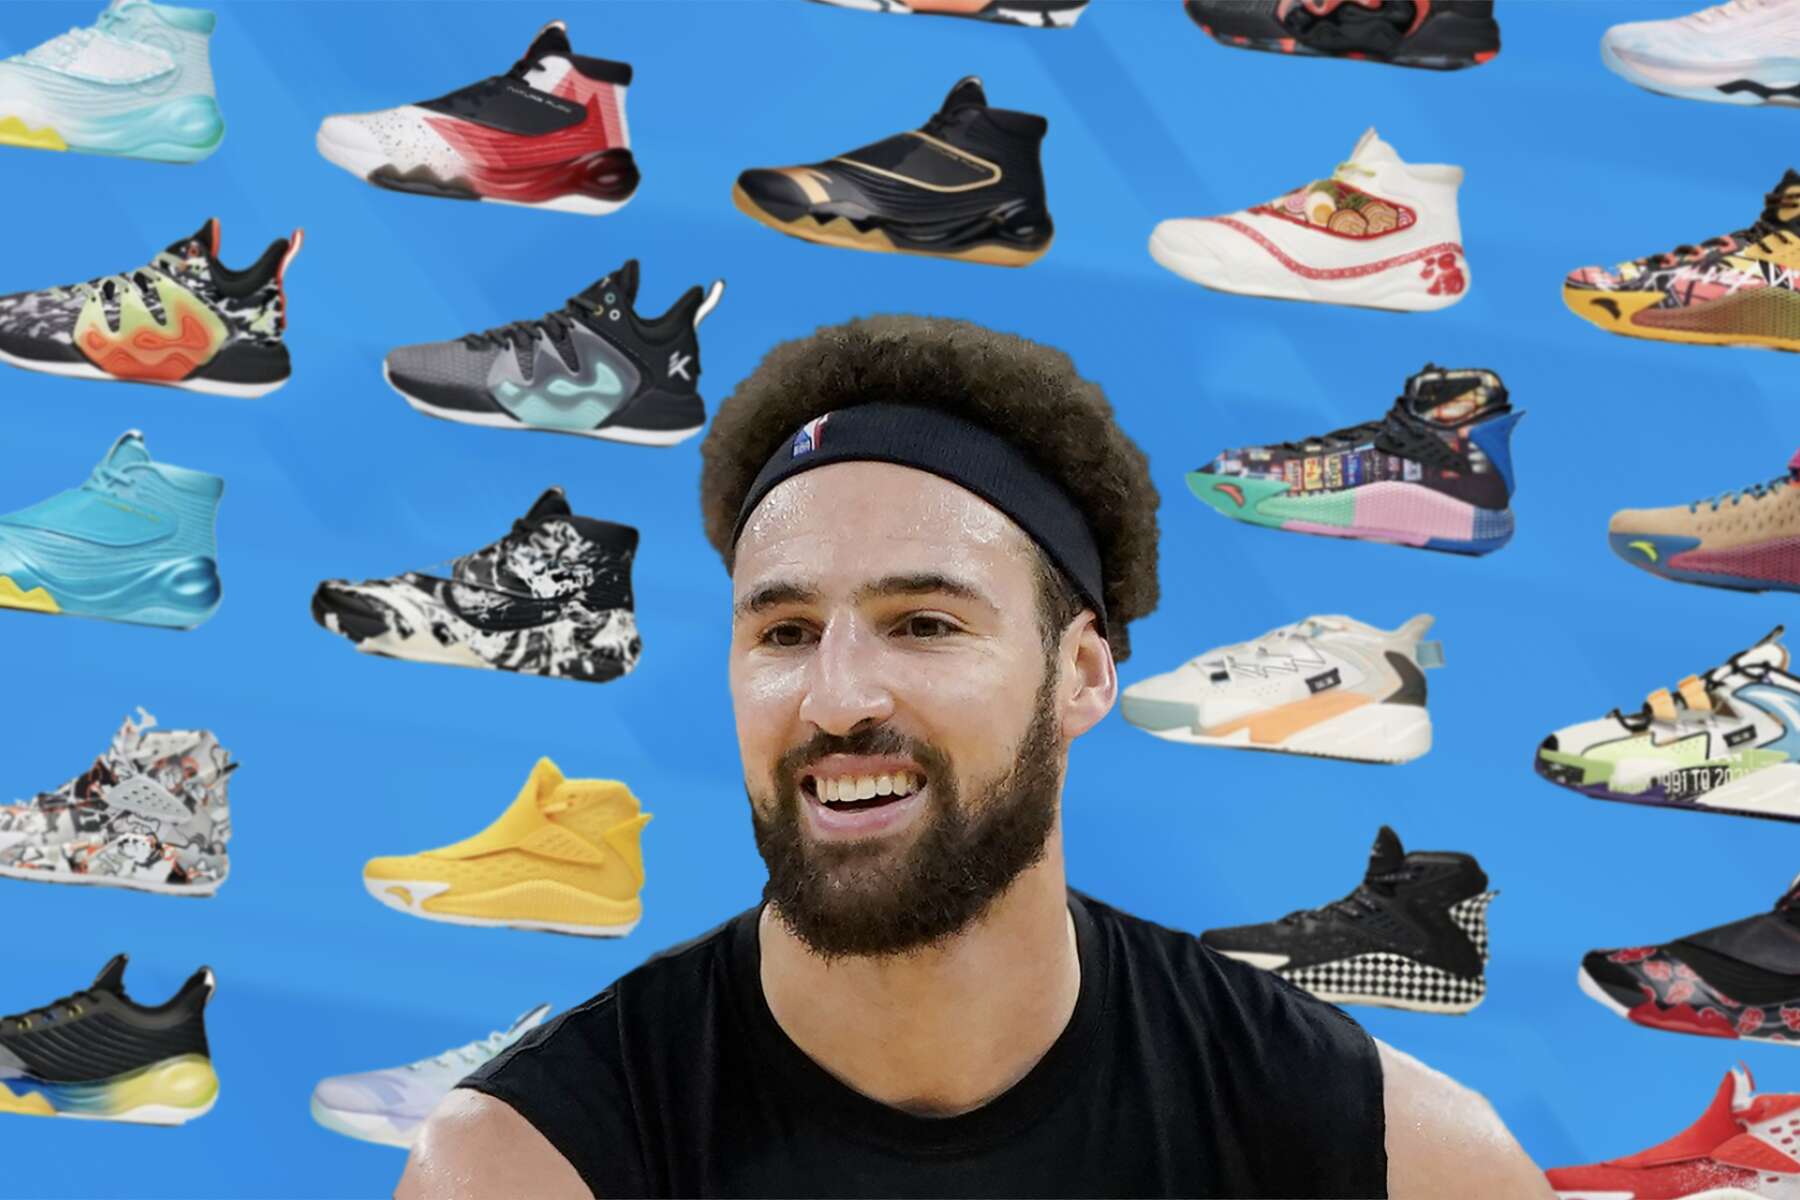 Klay on why he signed with Anta over Nike or Adidas: I was going